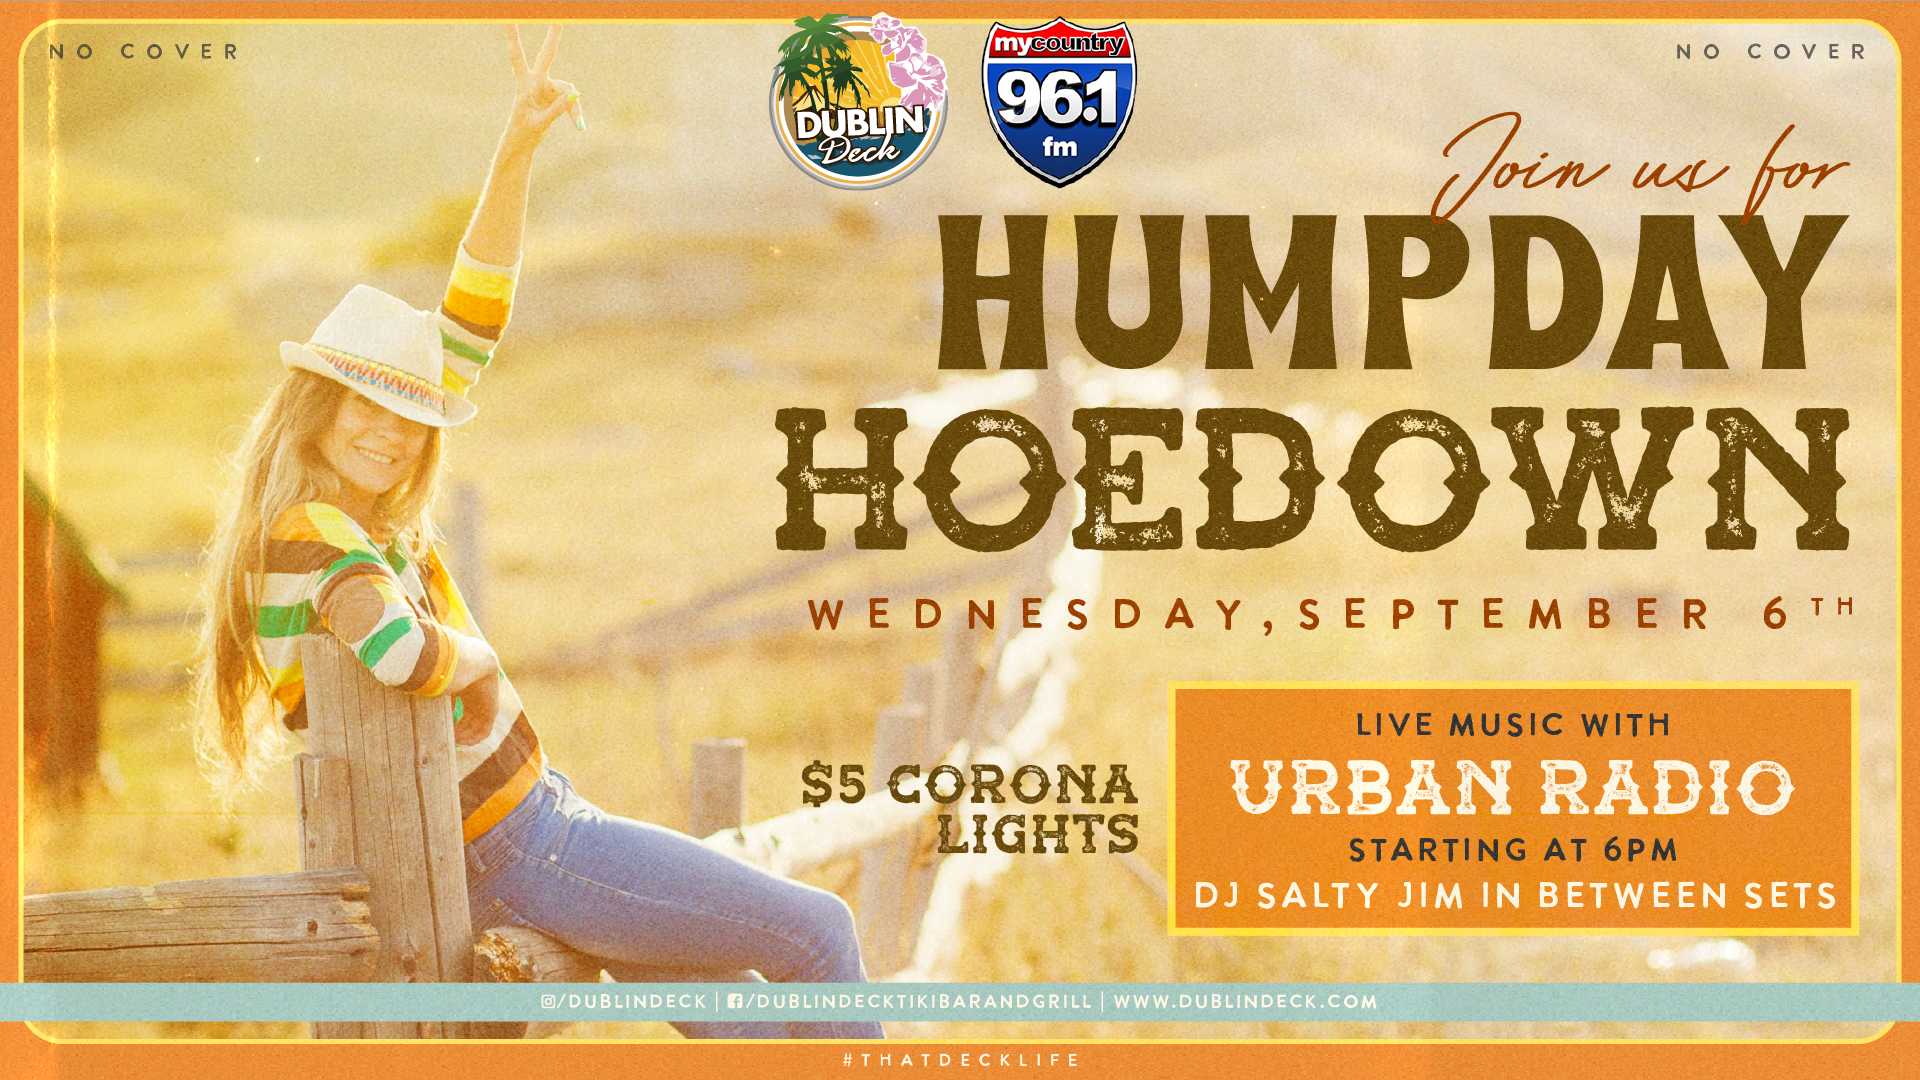 Are you ready for another Humpday Hoedown with Urban Radio? The fun starts at 6PM